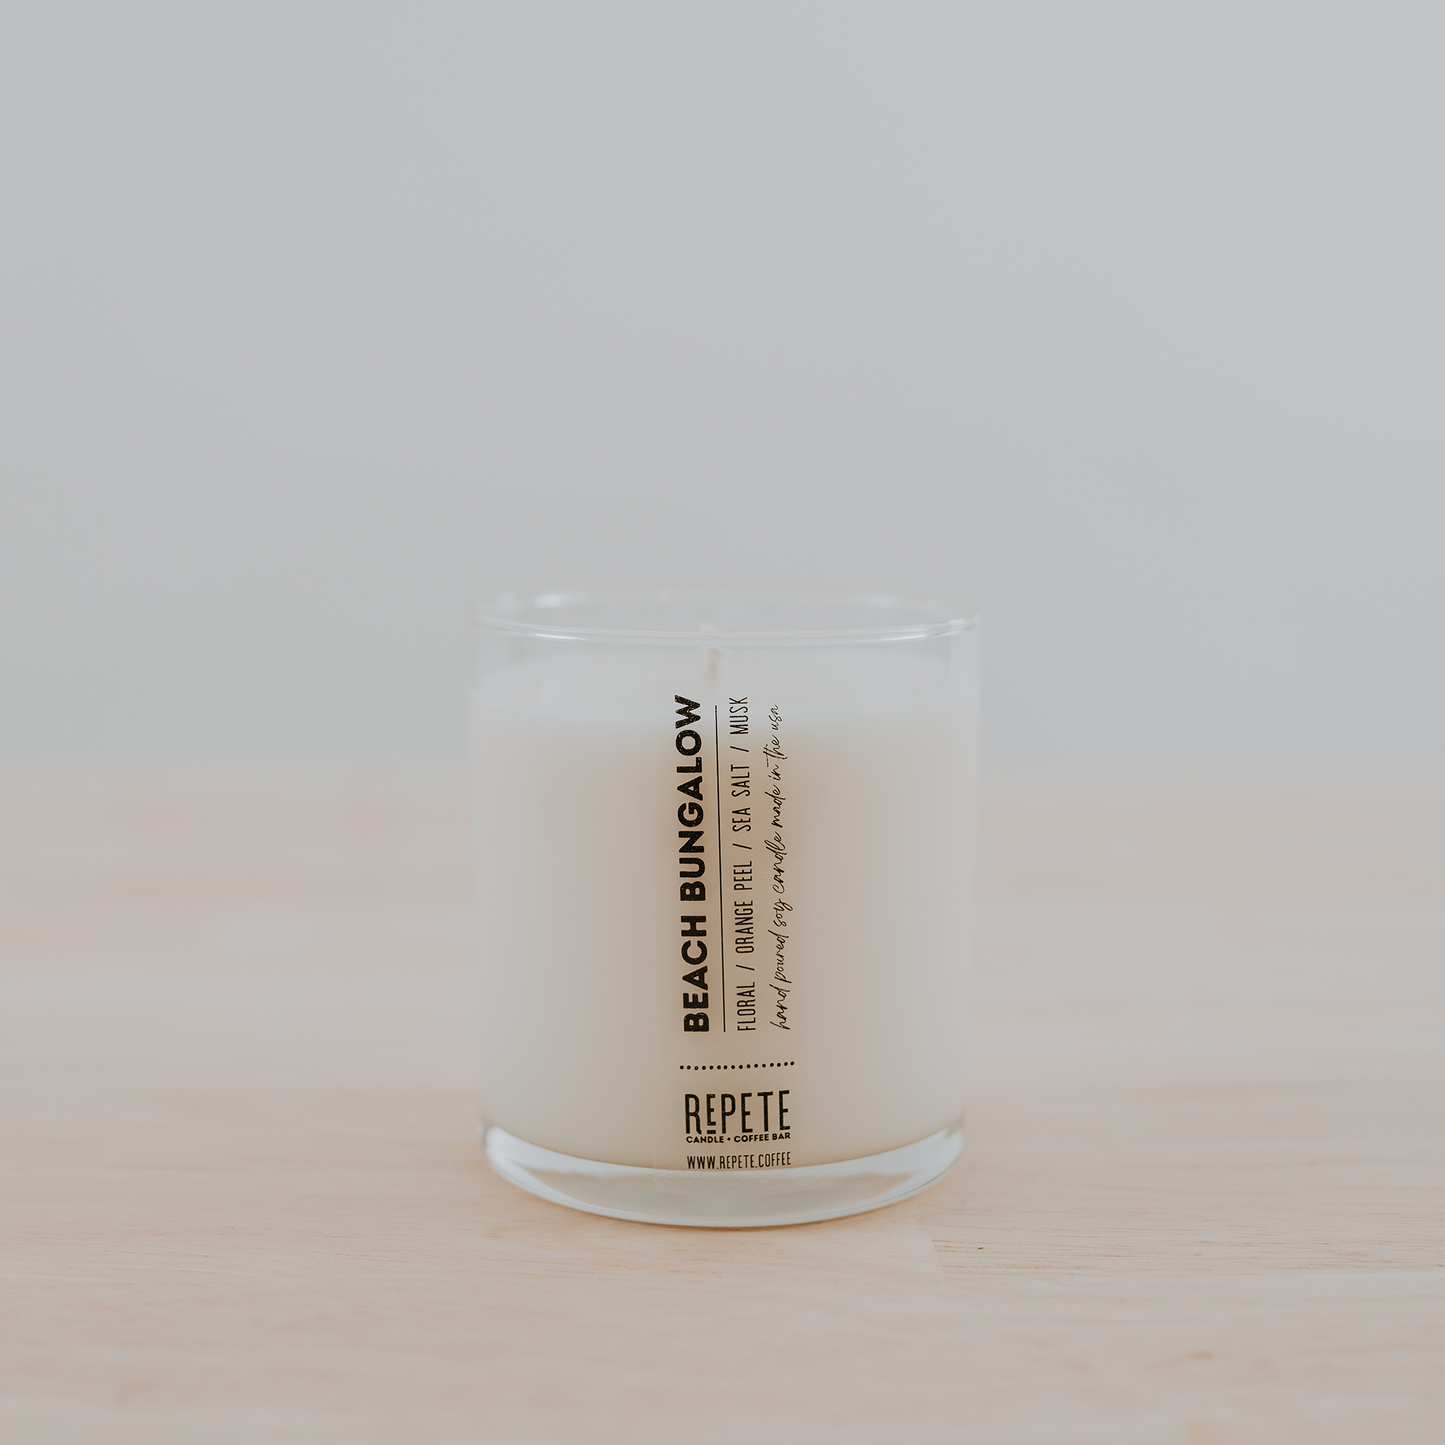 Beach bungalow nine ounce candle at Repete Candle and Coffee Bar